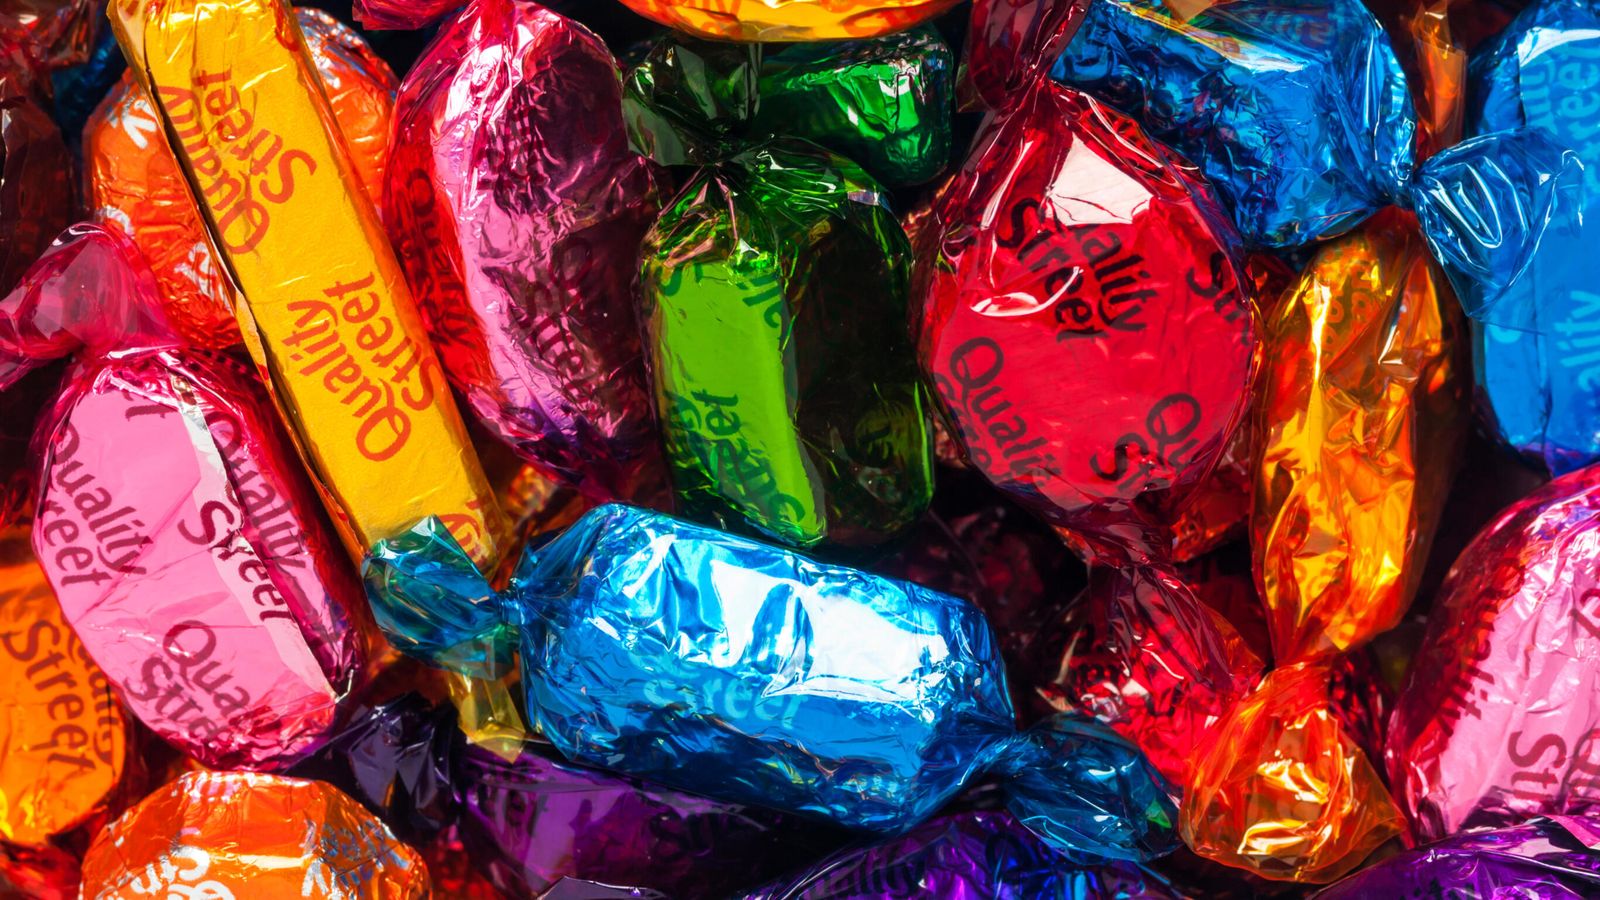 Quality Street axes famous plastic wrappers on chocolates after 86 years as  part of green drive, UK News